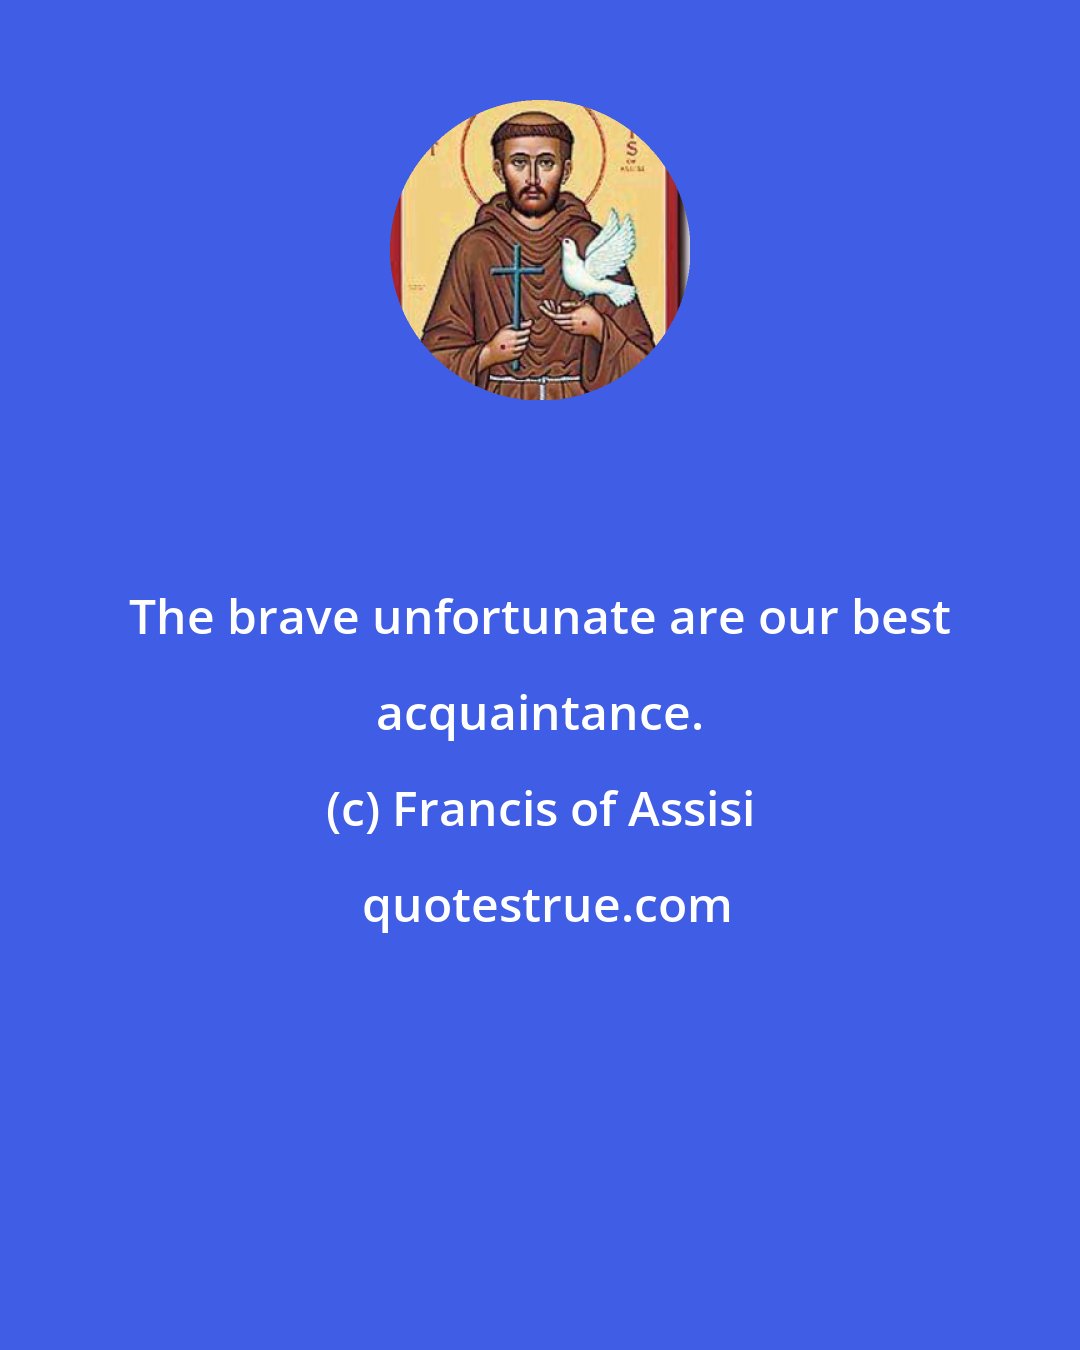 Francis of Assisi: The brave unfortunate are our best acquaintance.